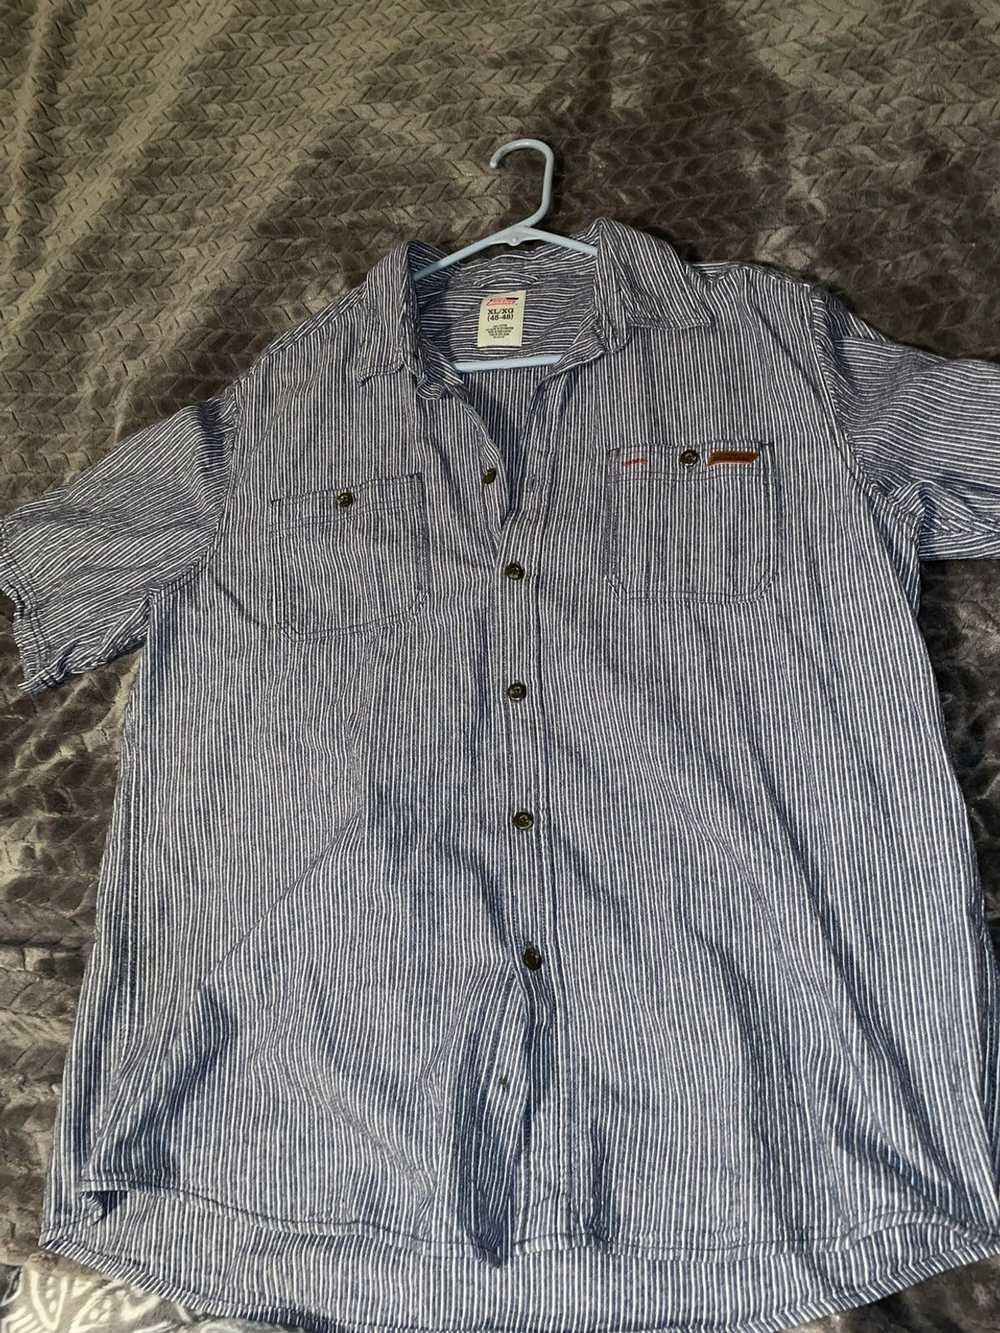 Dickies Dickies Striped Button Up - image 1